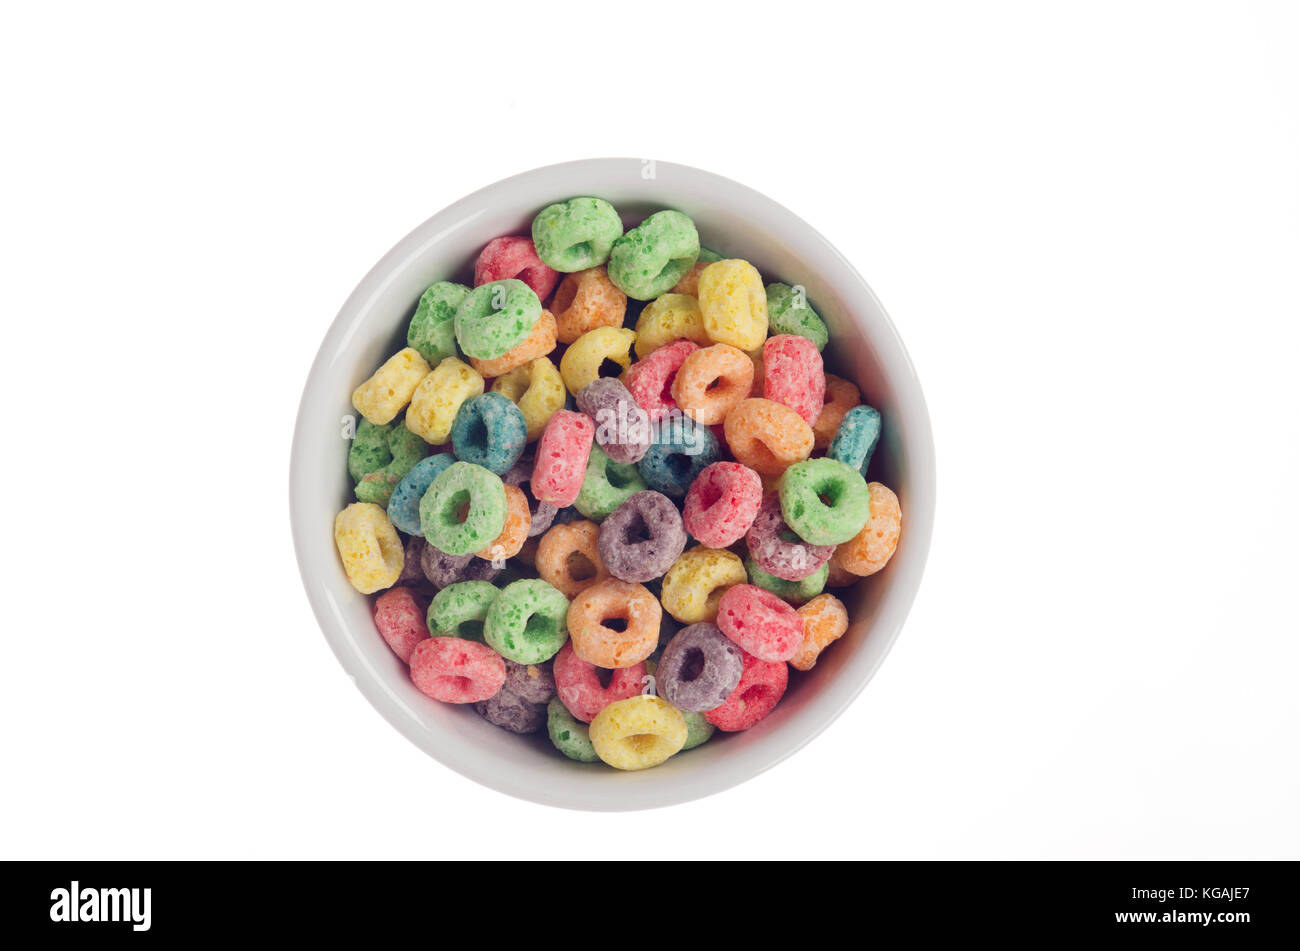 Bowl of Kellogg's Froot Loops cereal from above isolated on white background Stock Photo